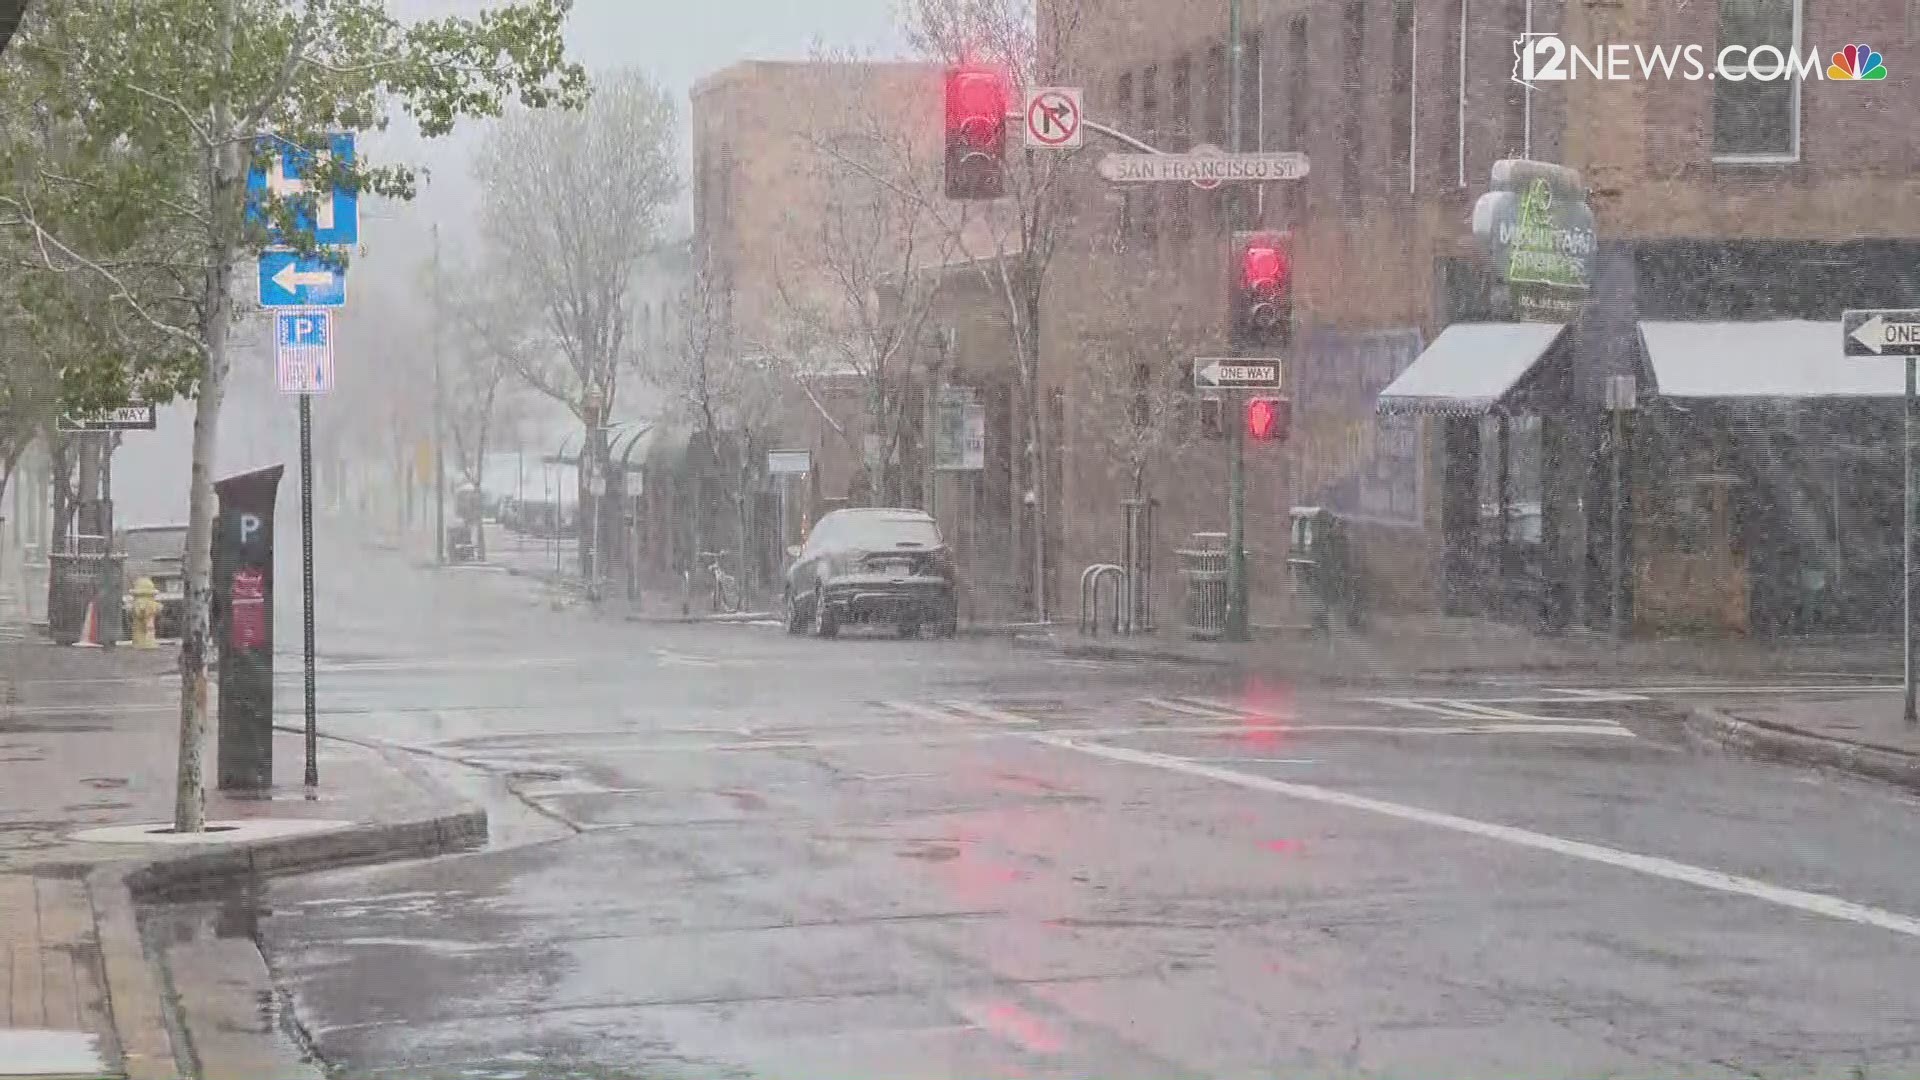 Snow was falling in Flagstaff early in the morning on Thursday, May 23.